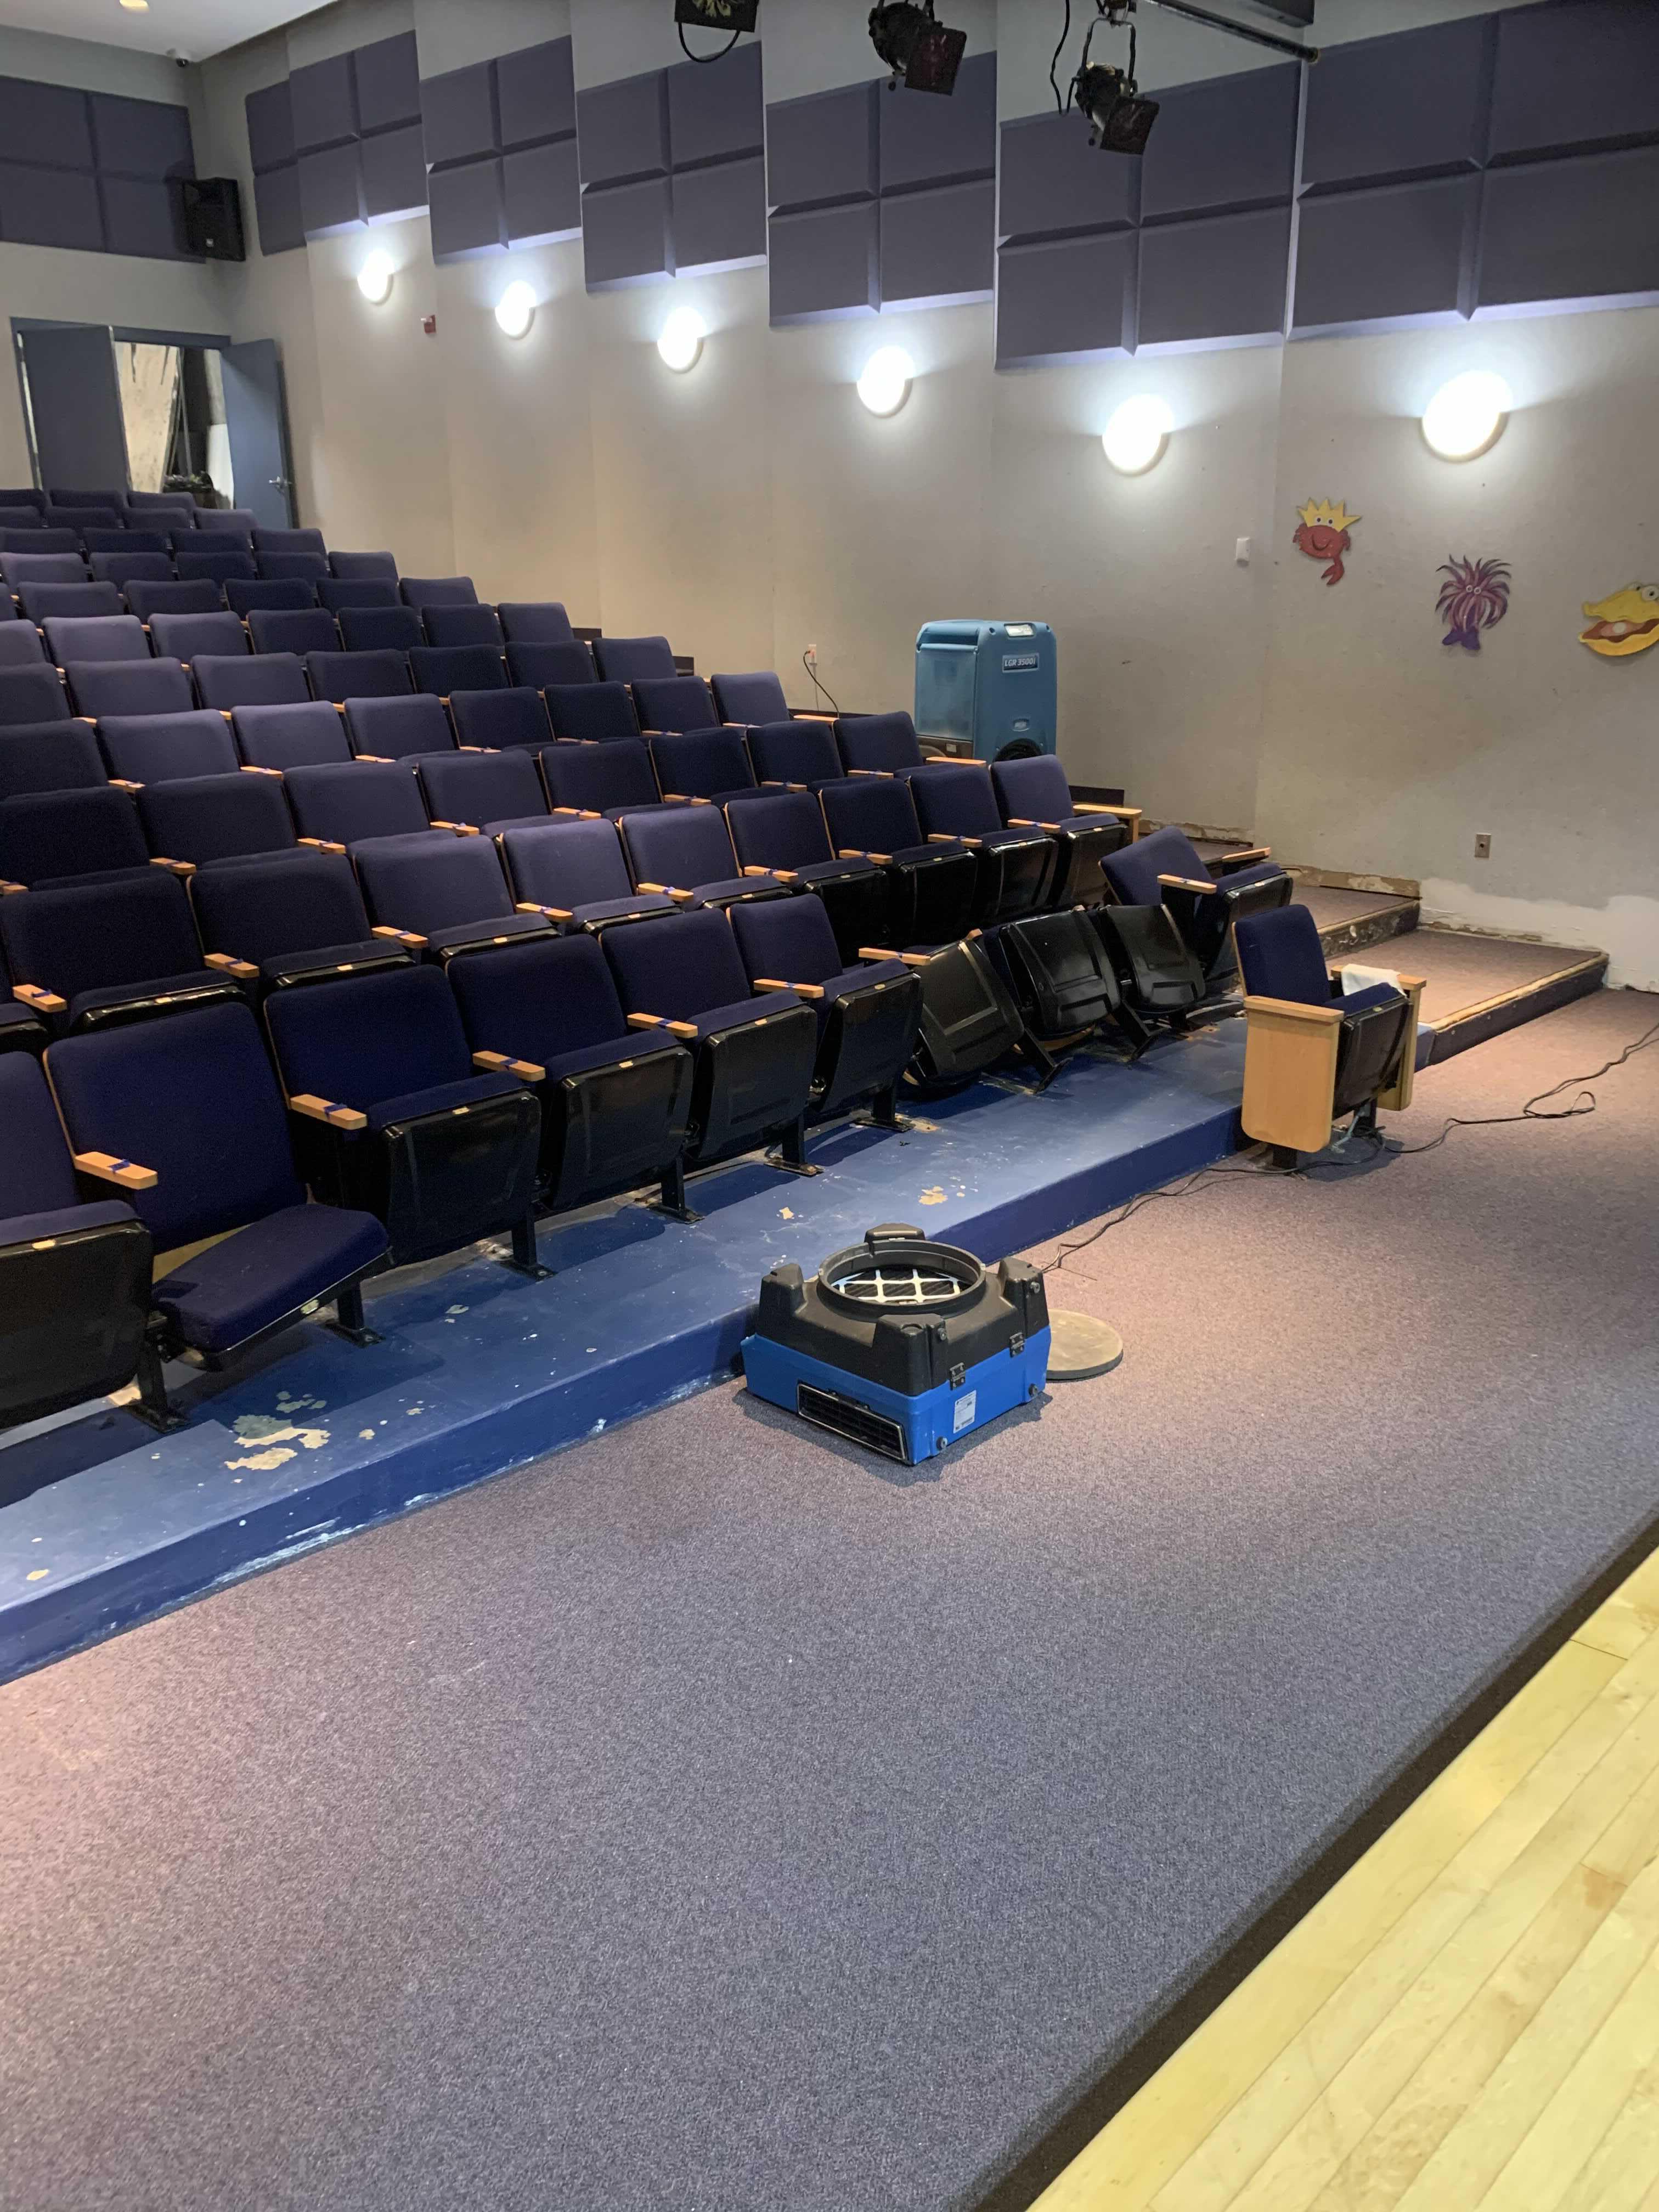  Water loss in Elementary School in White Plains, NY